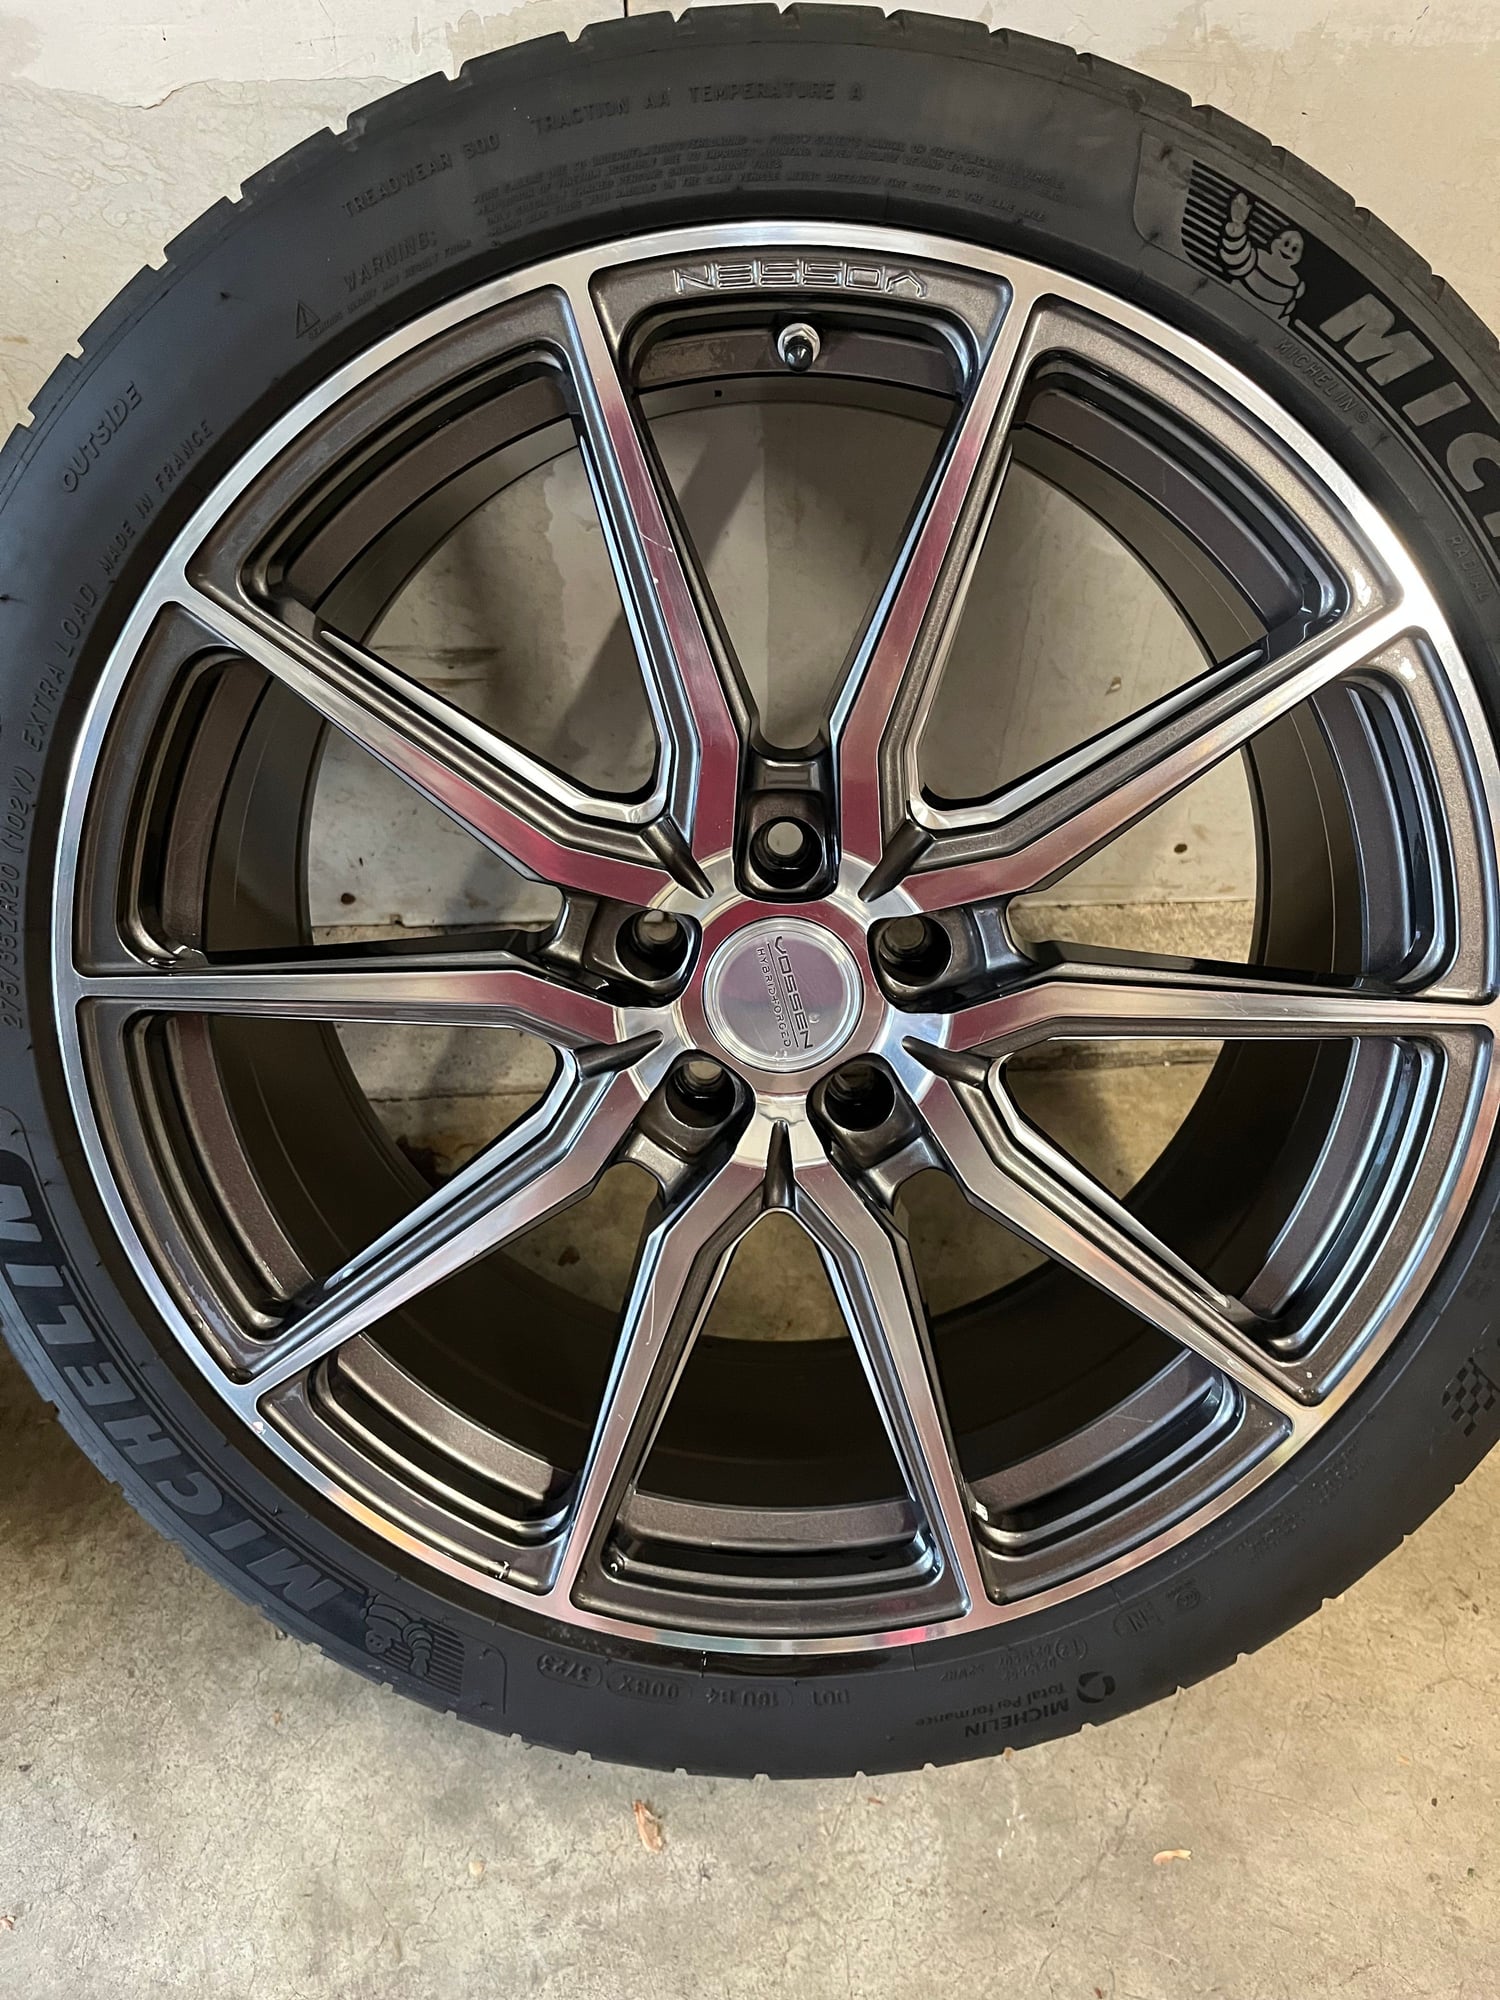 Wheels and Tires/Axles - Vossen HF-3 wheels and tires - Used - Sykesville, MD 21784, United States